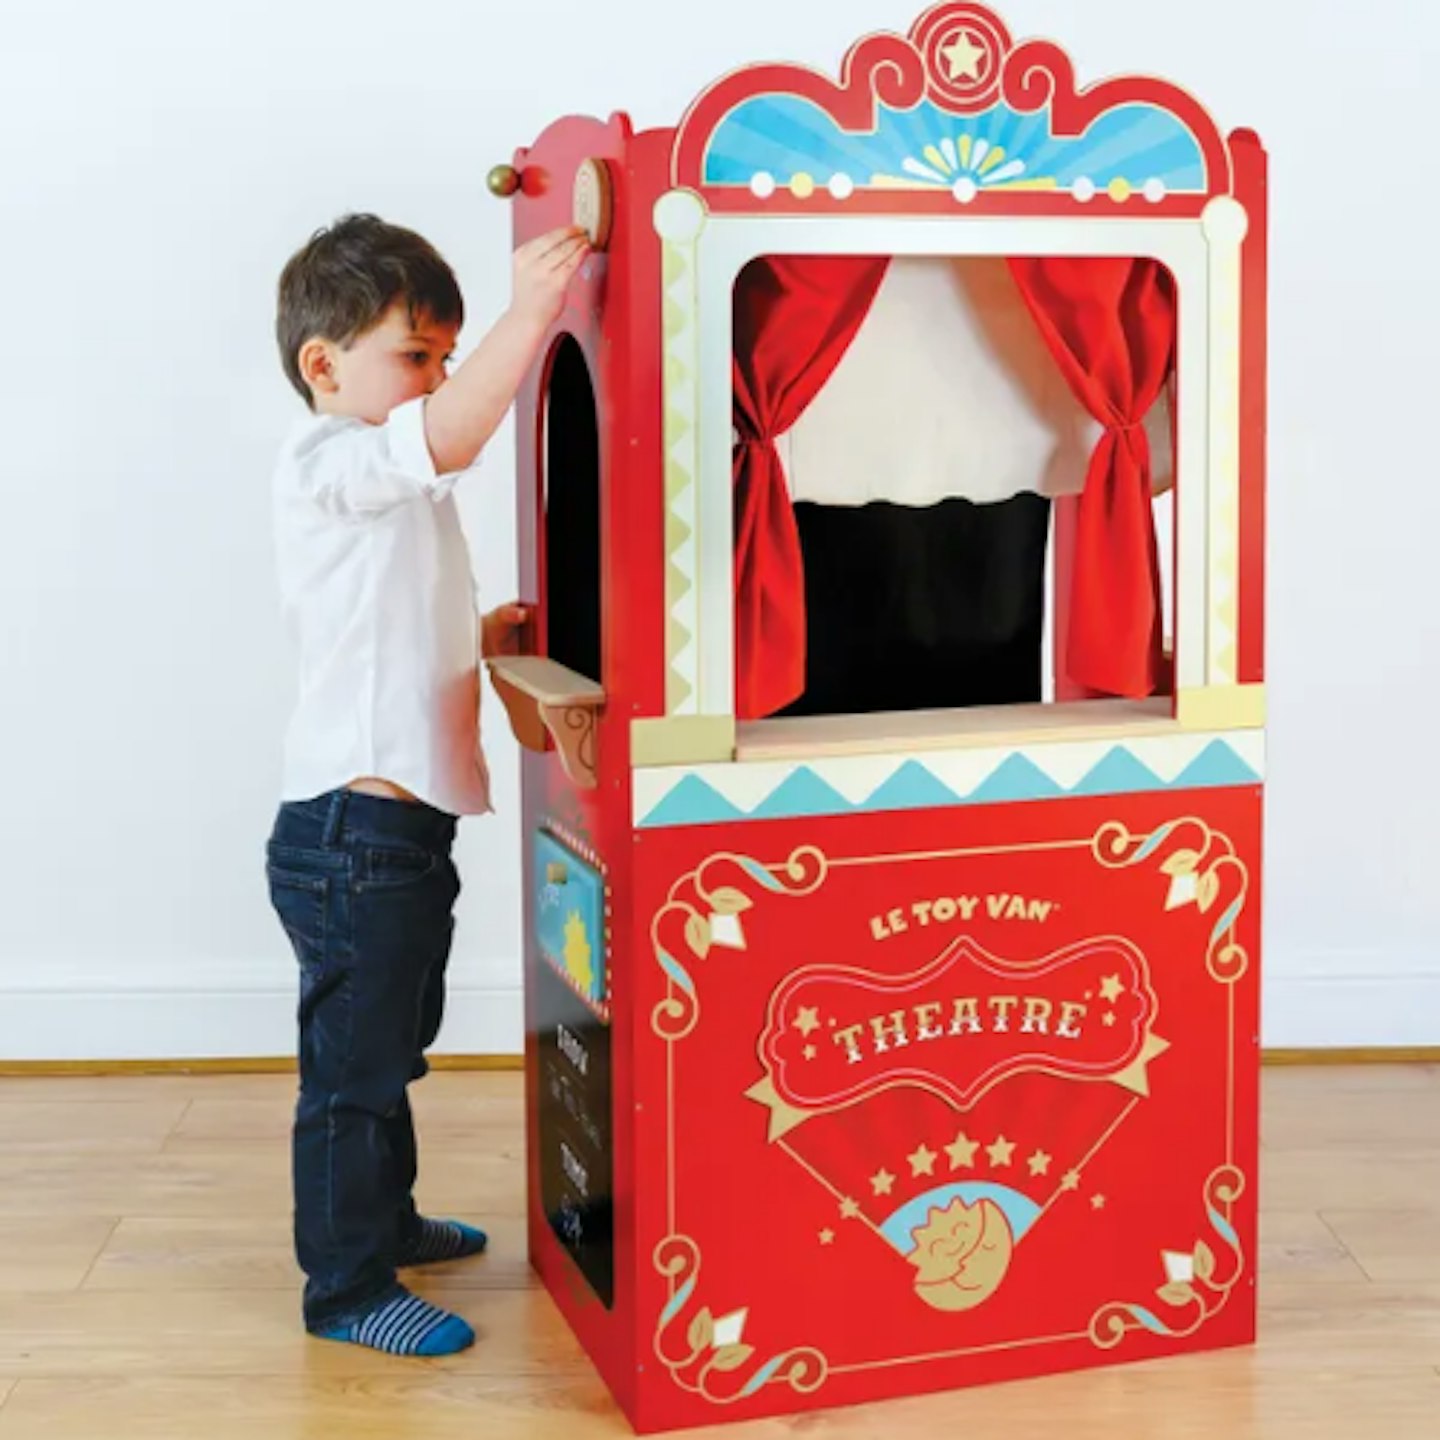 Puppet shows and theatres - Time Out London